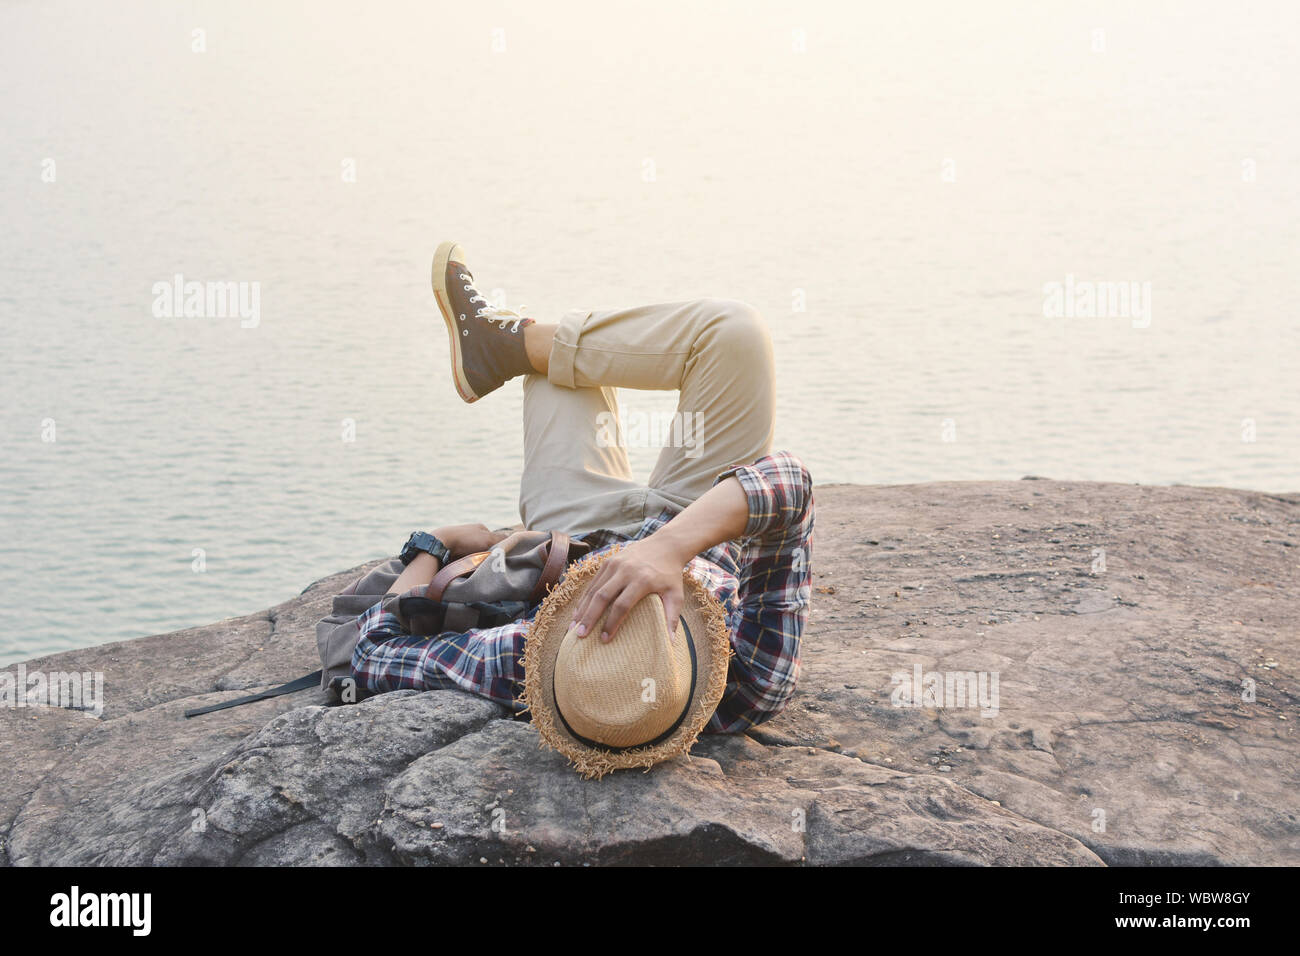 Man Relaxing On Rock Against River During Foggy Weather Stock Photo